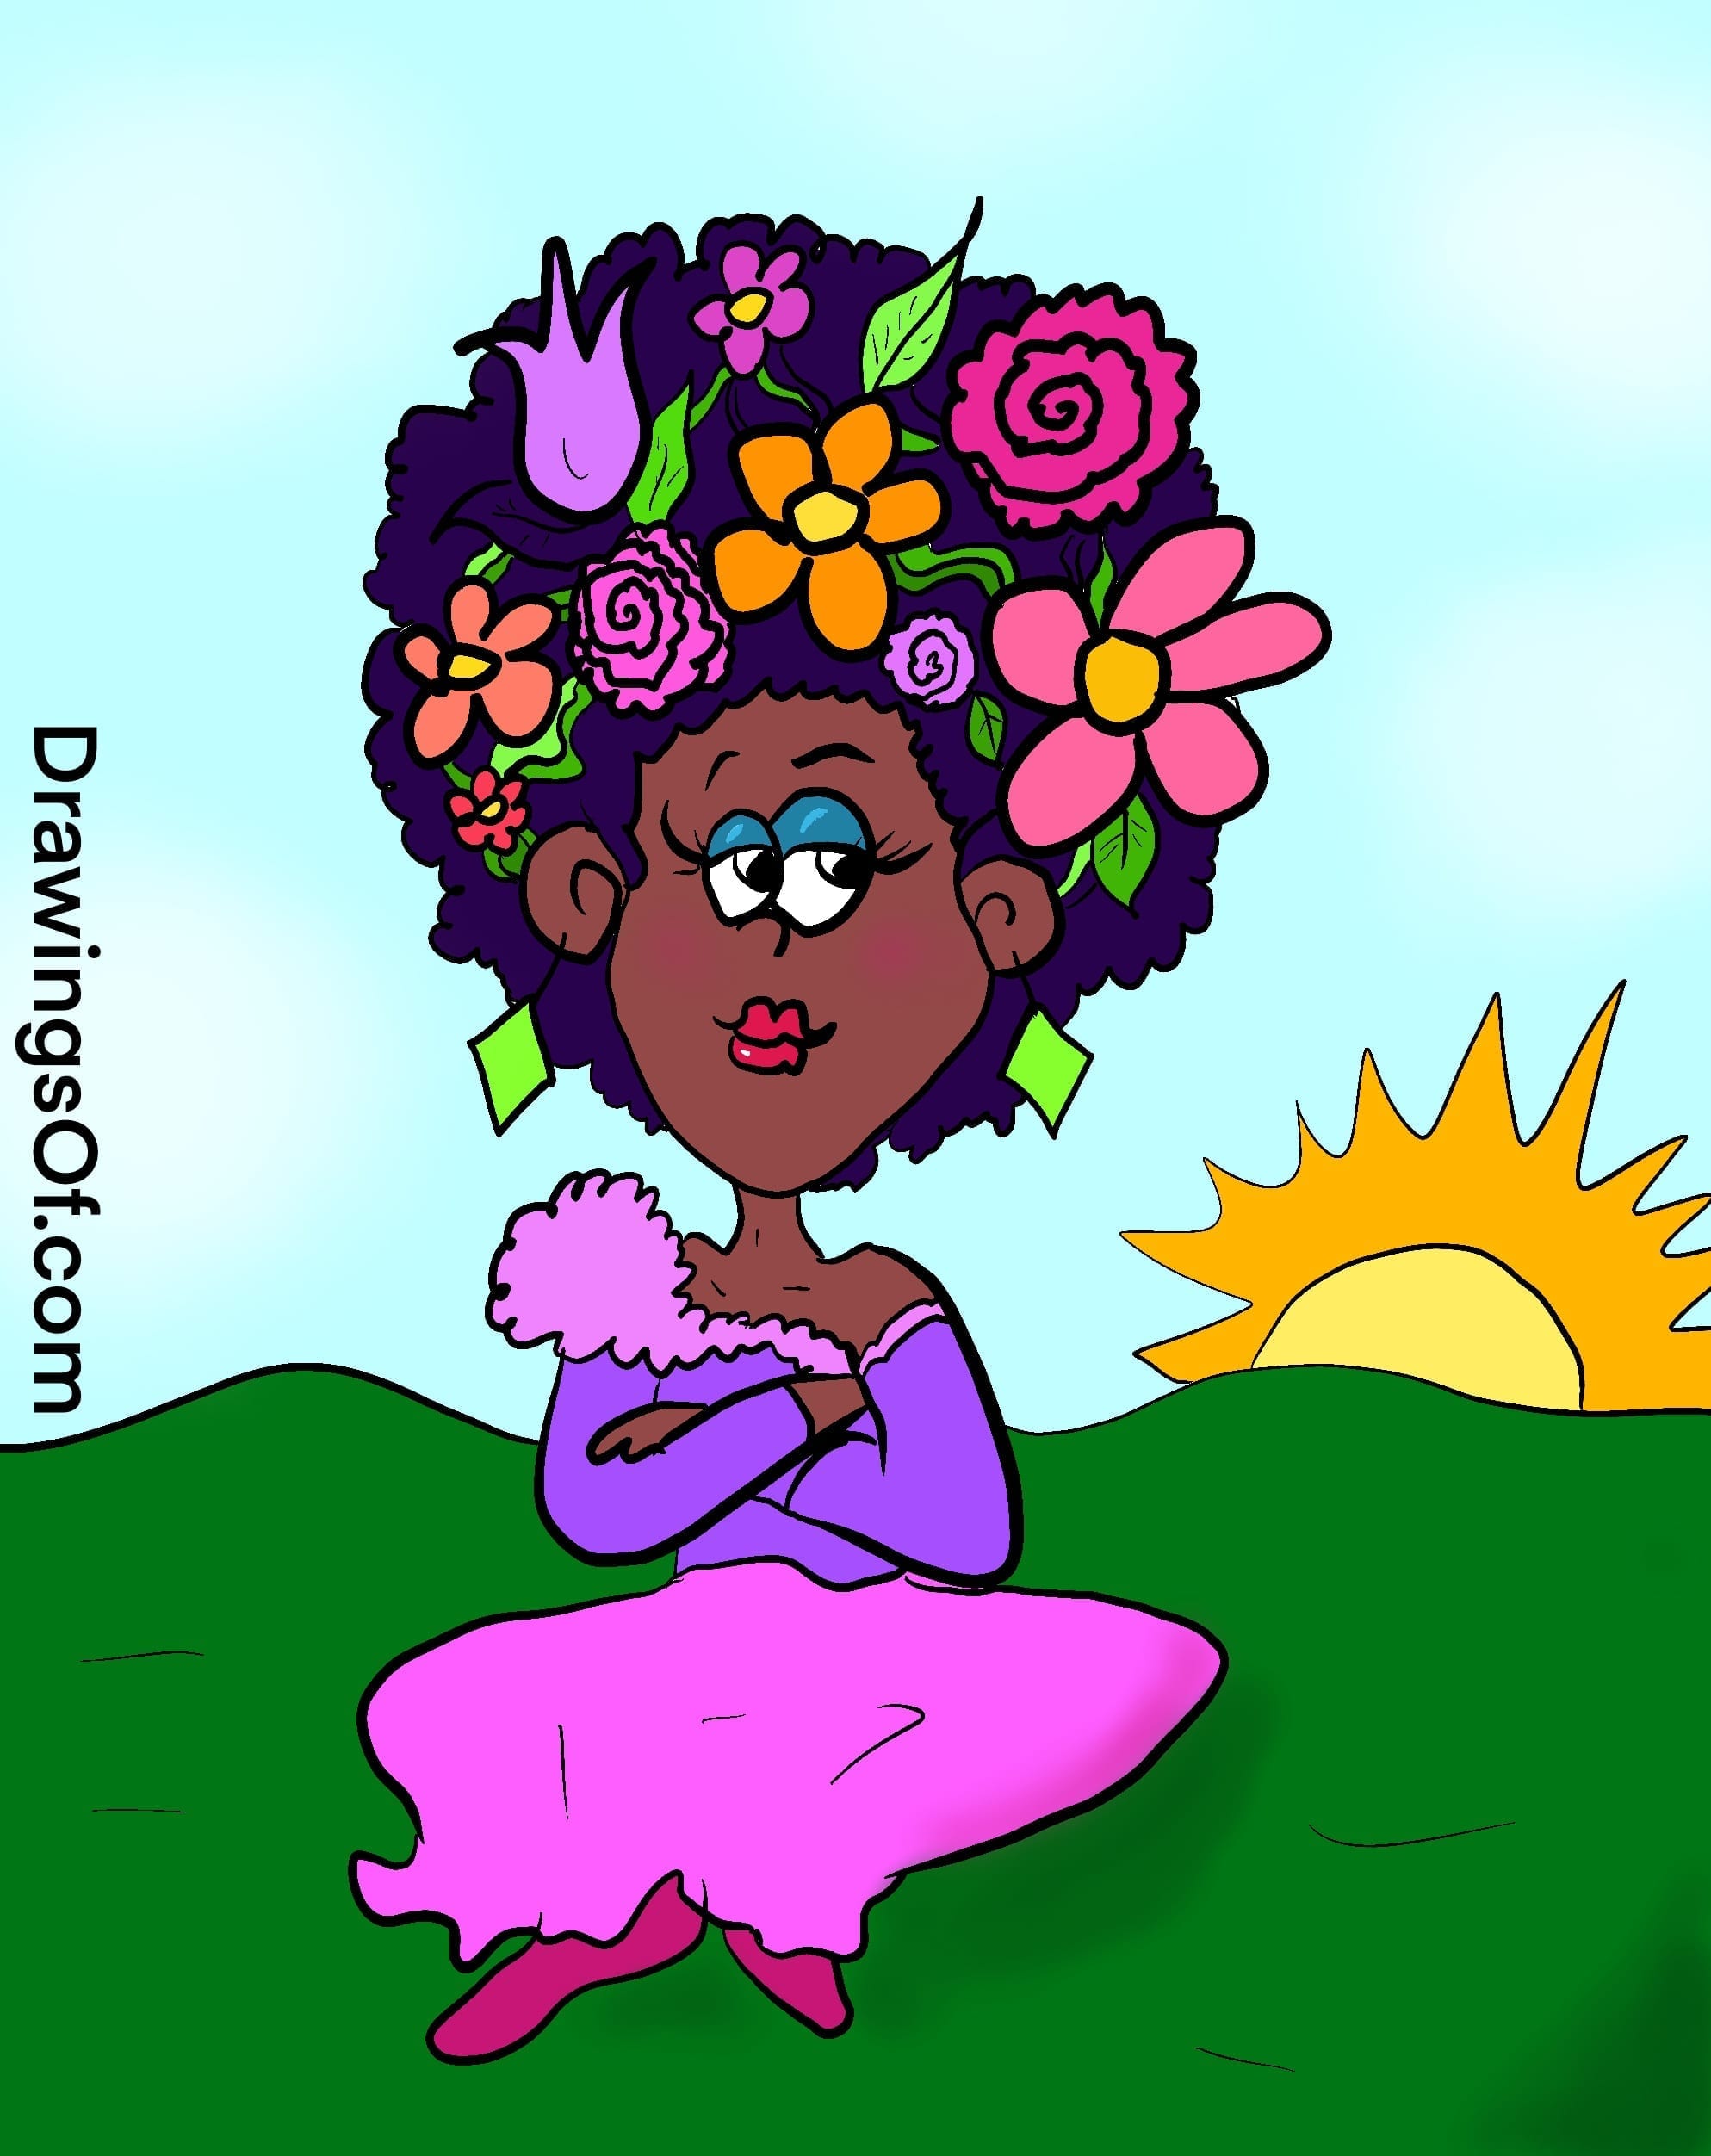 Cartoon of colorful flowers in a woman's hair